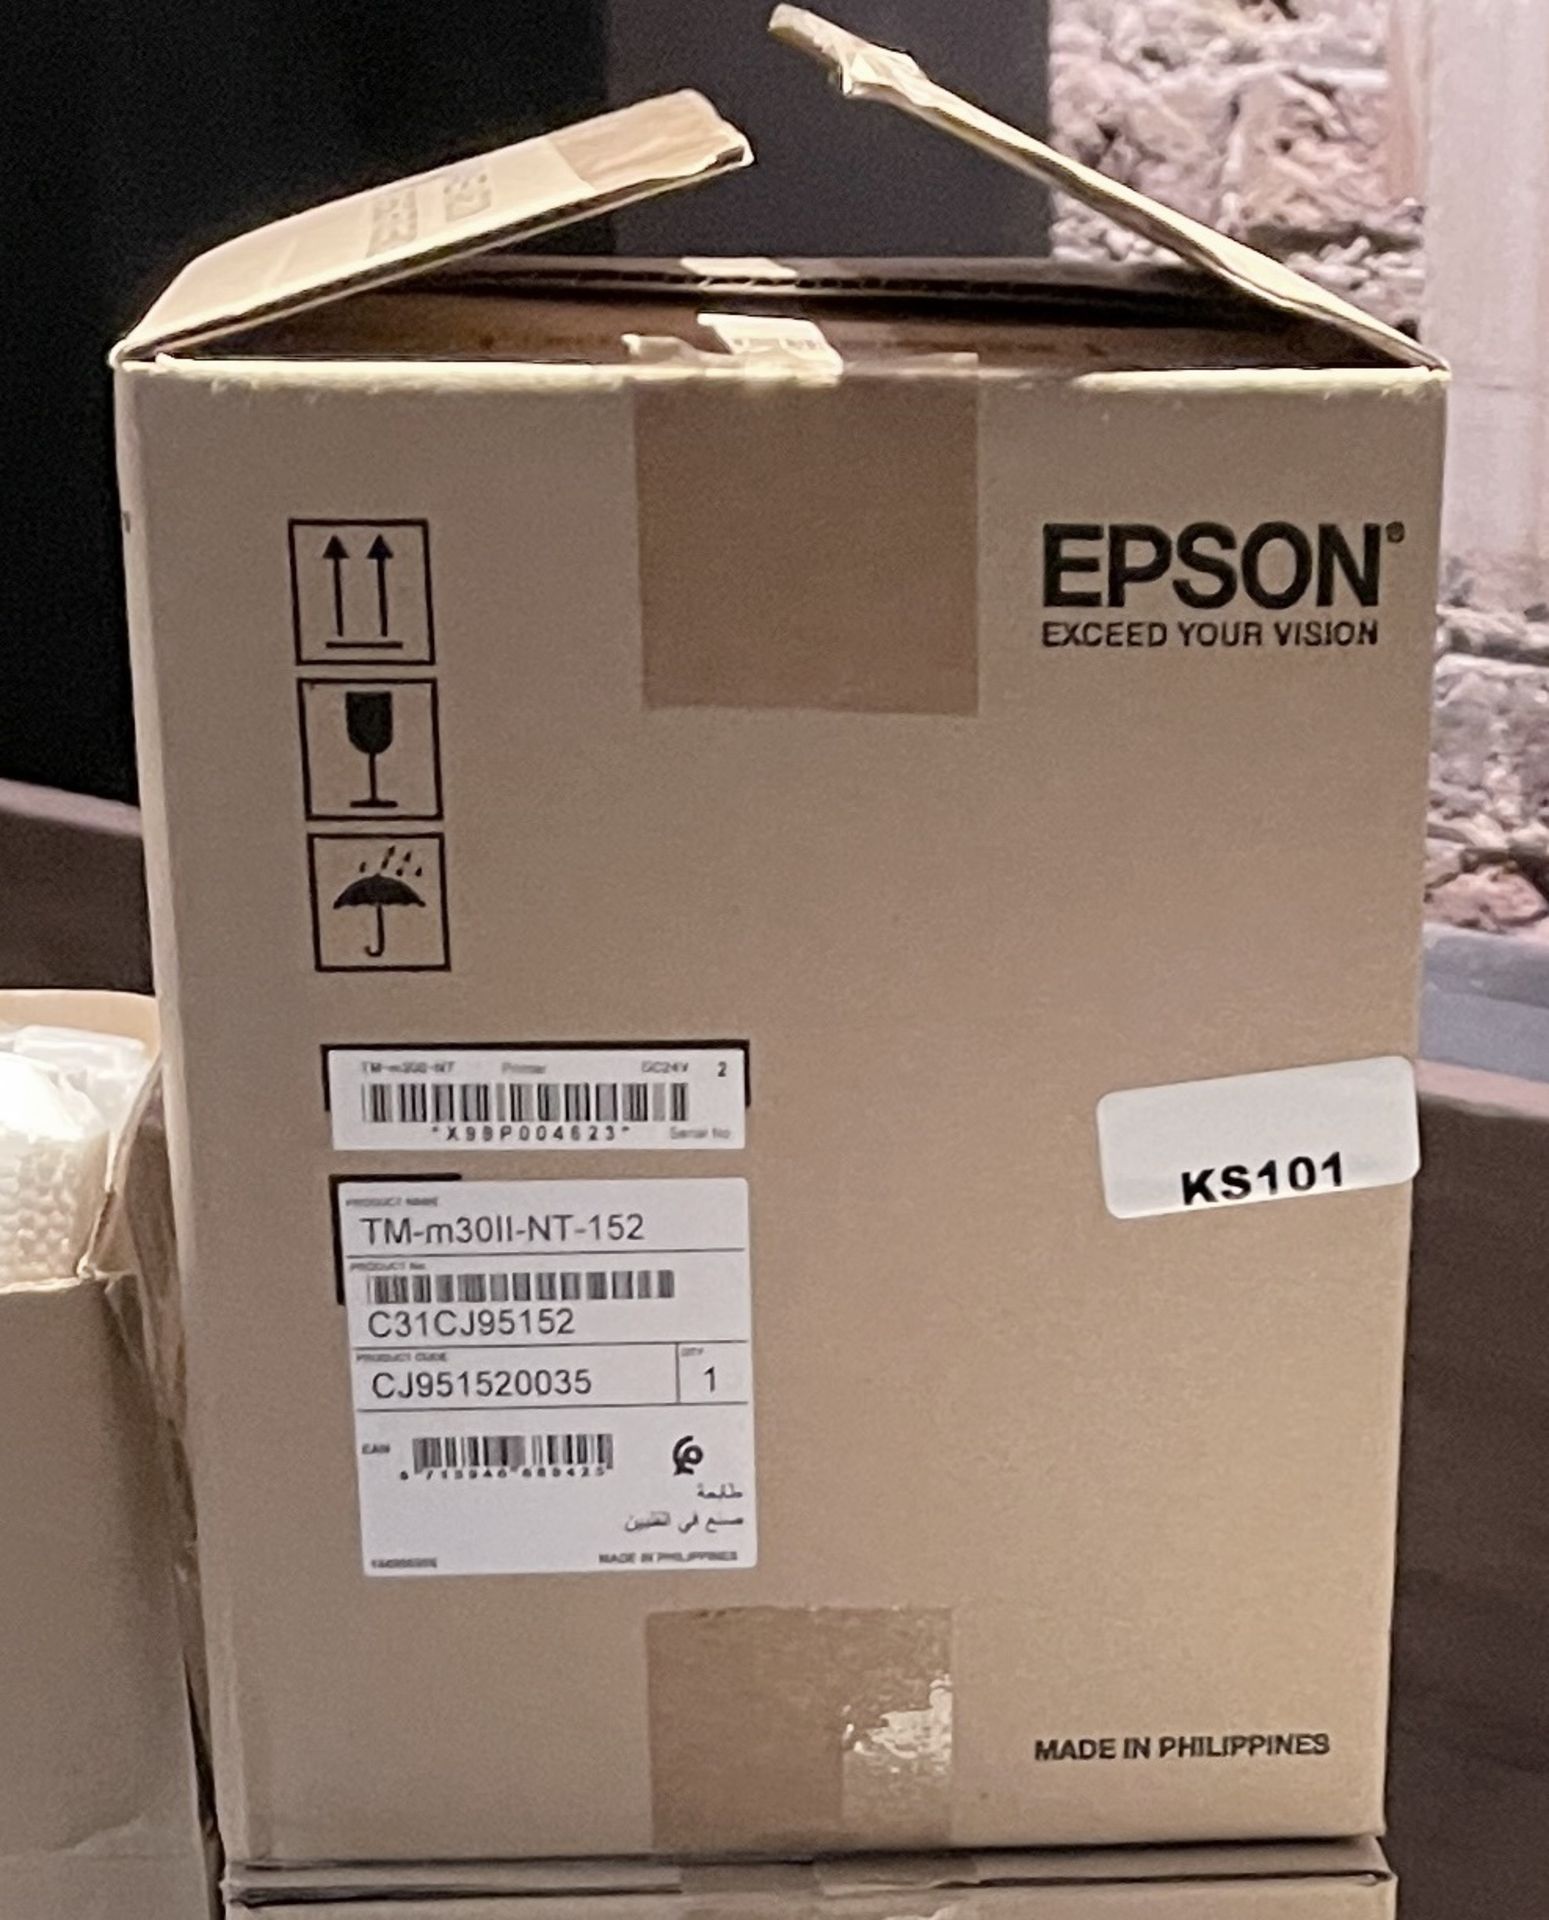 3 x Epson TM-M30II Thermal POS Printers For Apple Devices and 2 x DoJo Go A920 Payment Terminals - Image 6 of 11